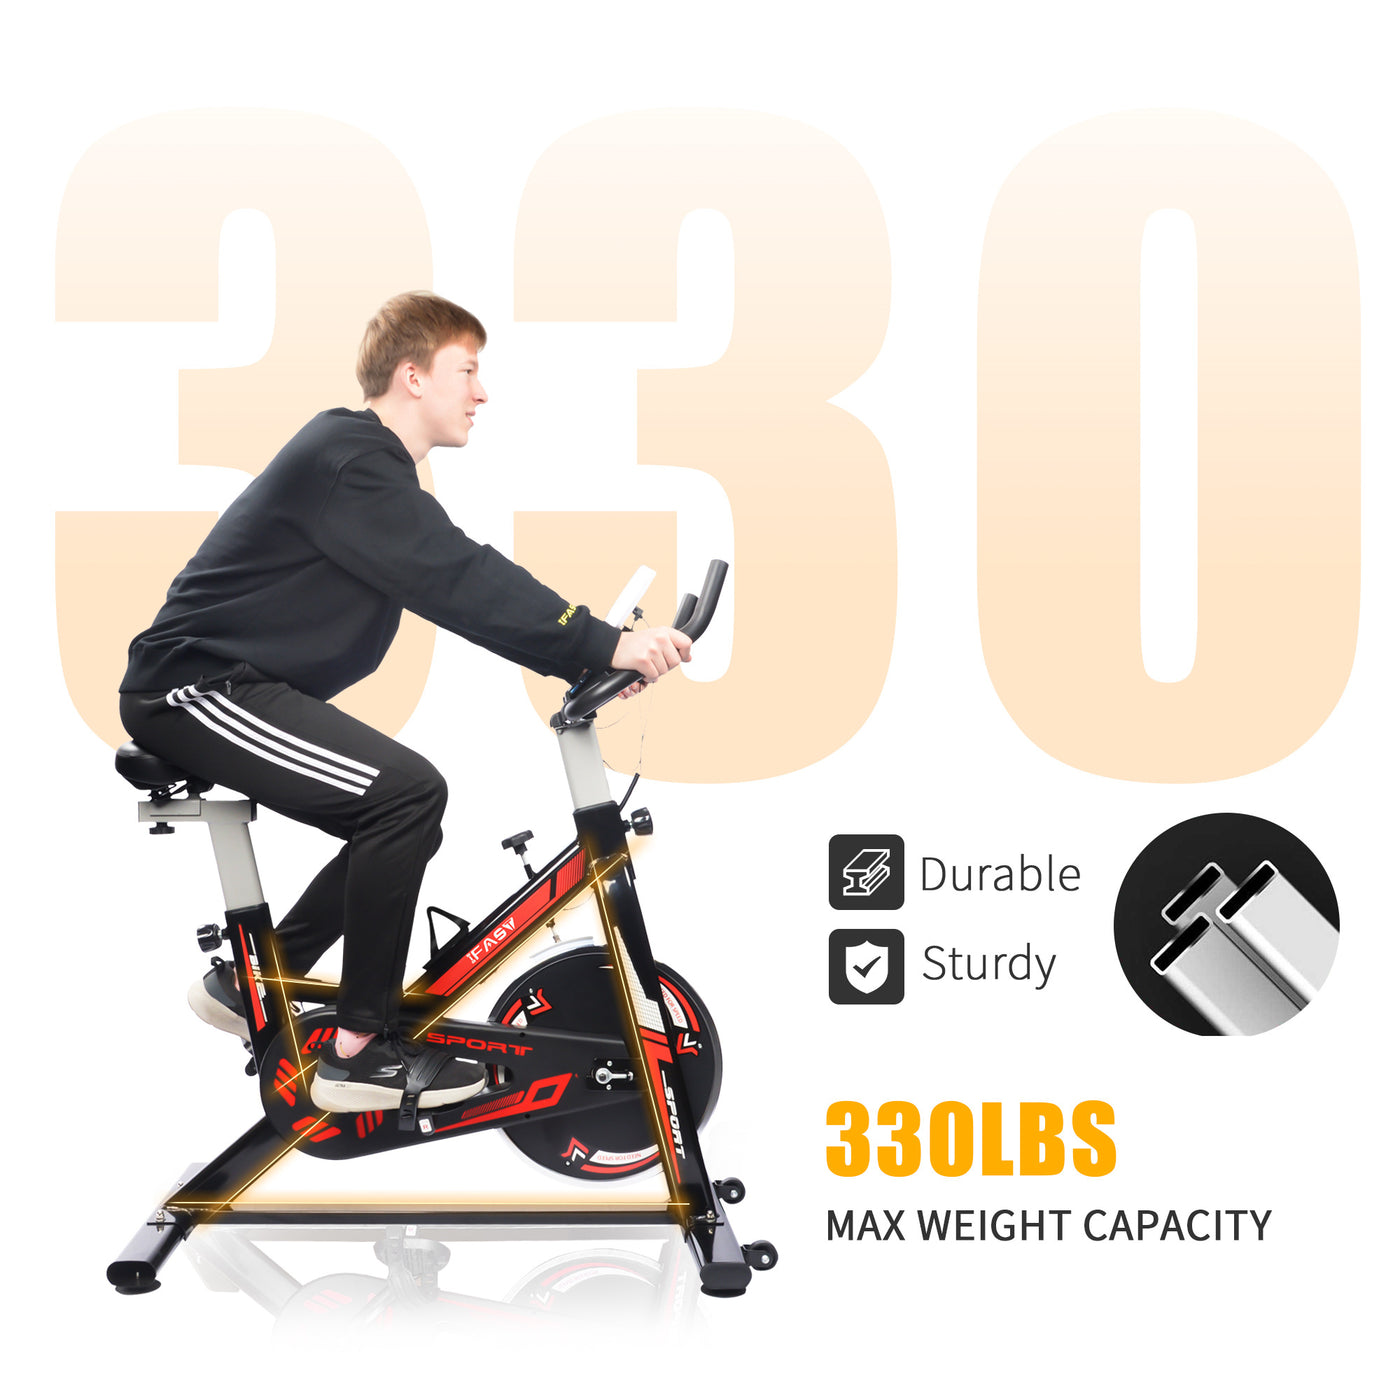 Exercise bike 330LBS max weight capacity